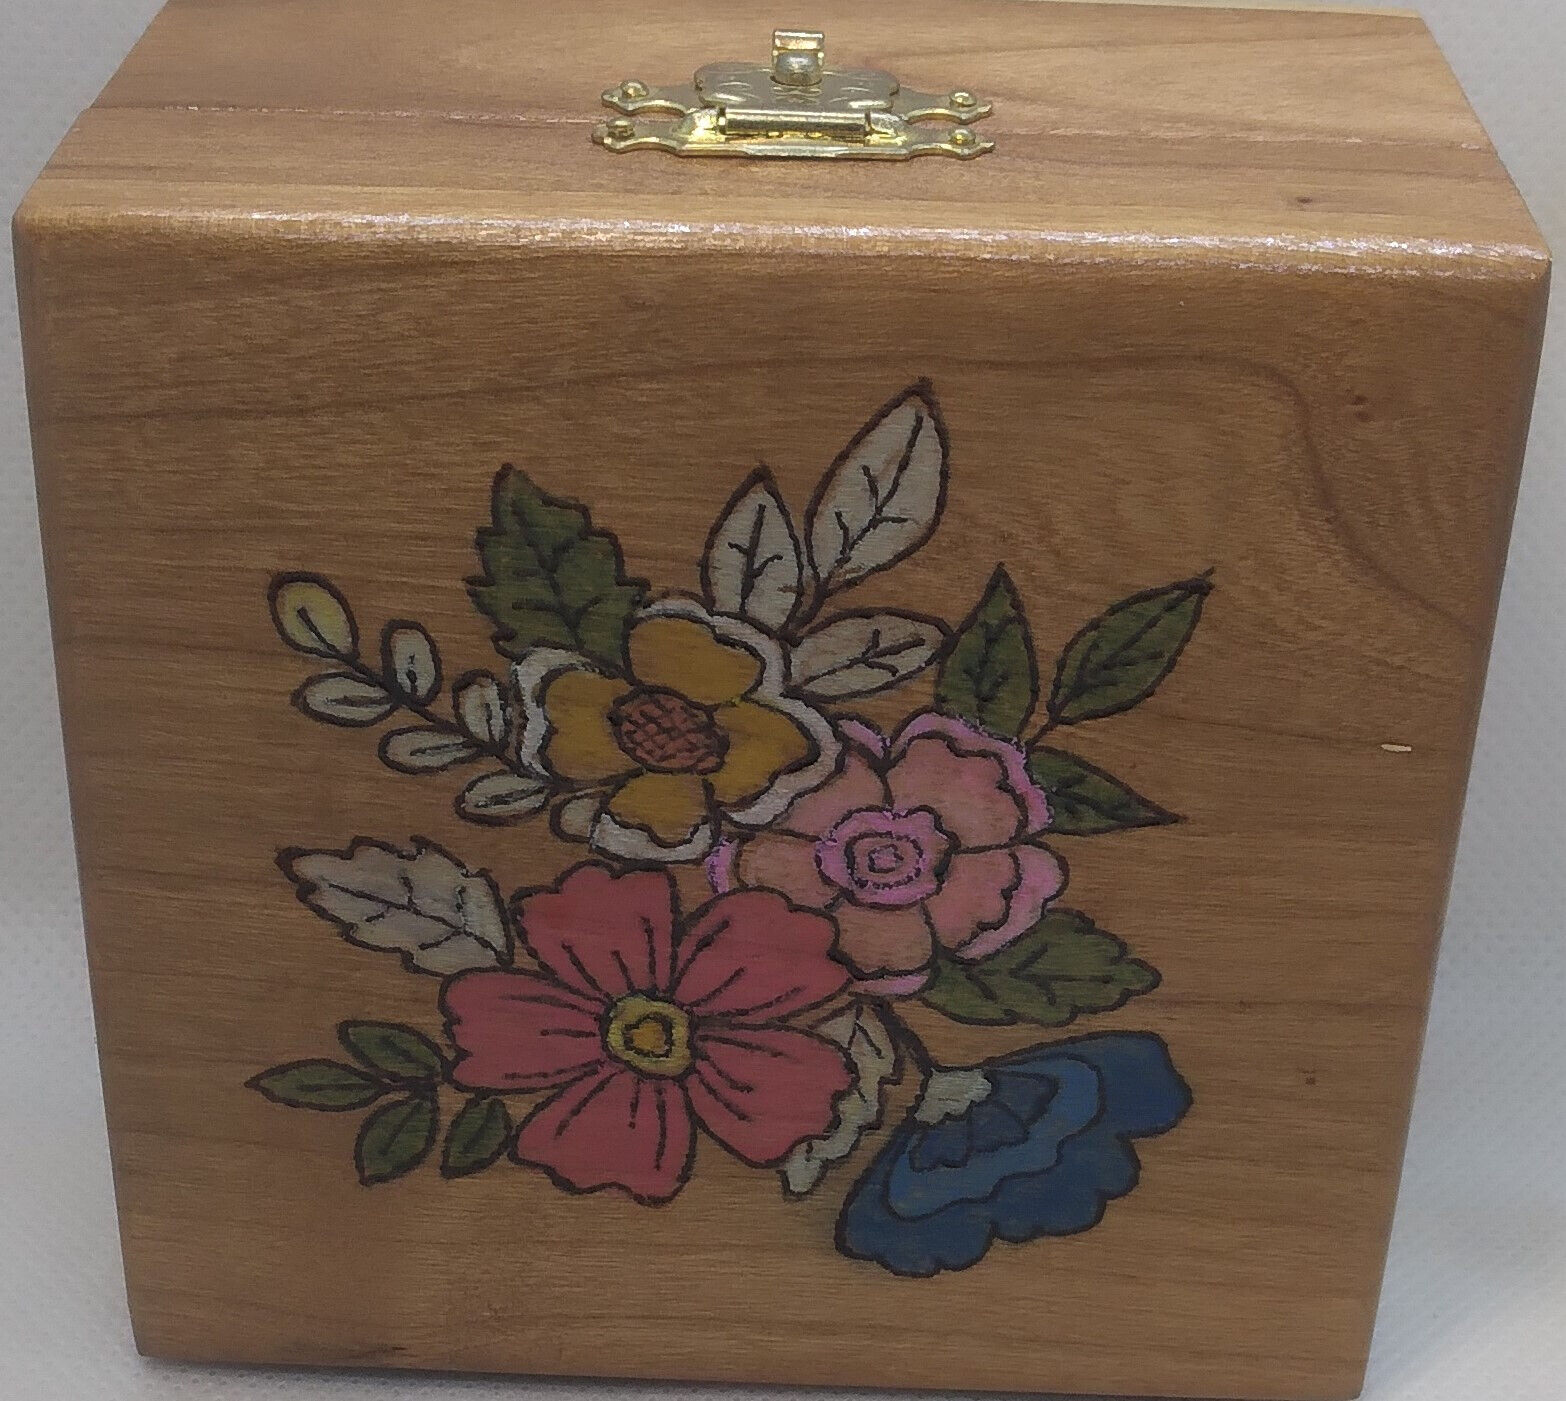 Handmade Wooden Box For Small Items Has 3 Flowers Top - Burned in